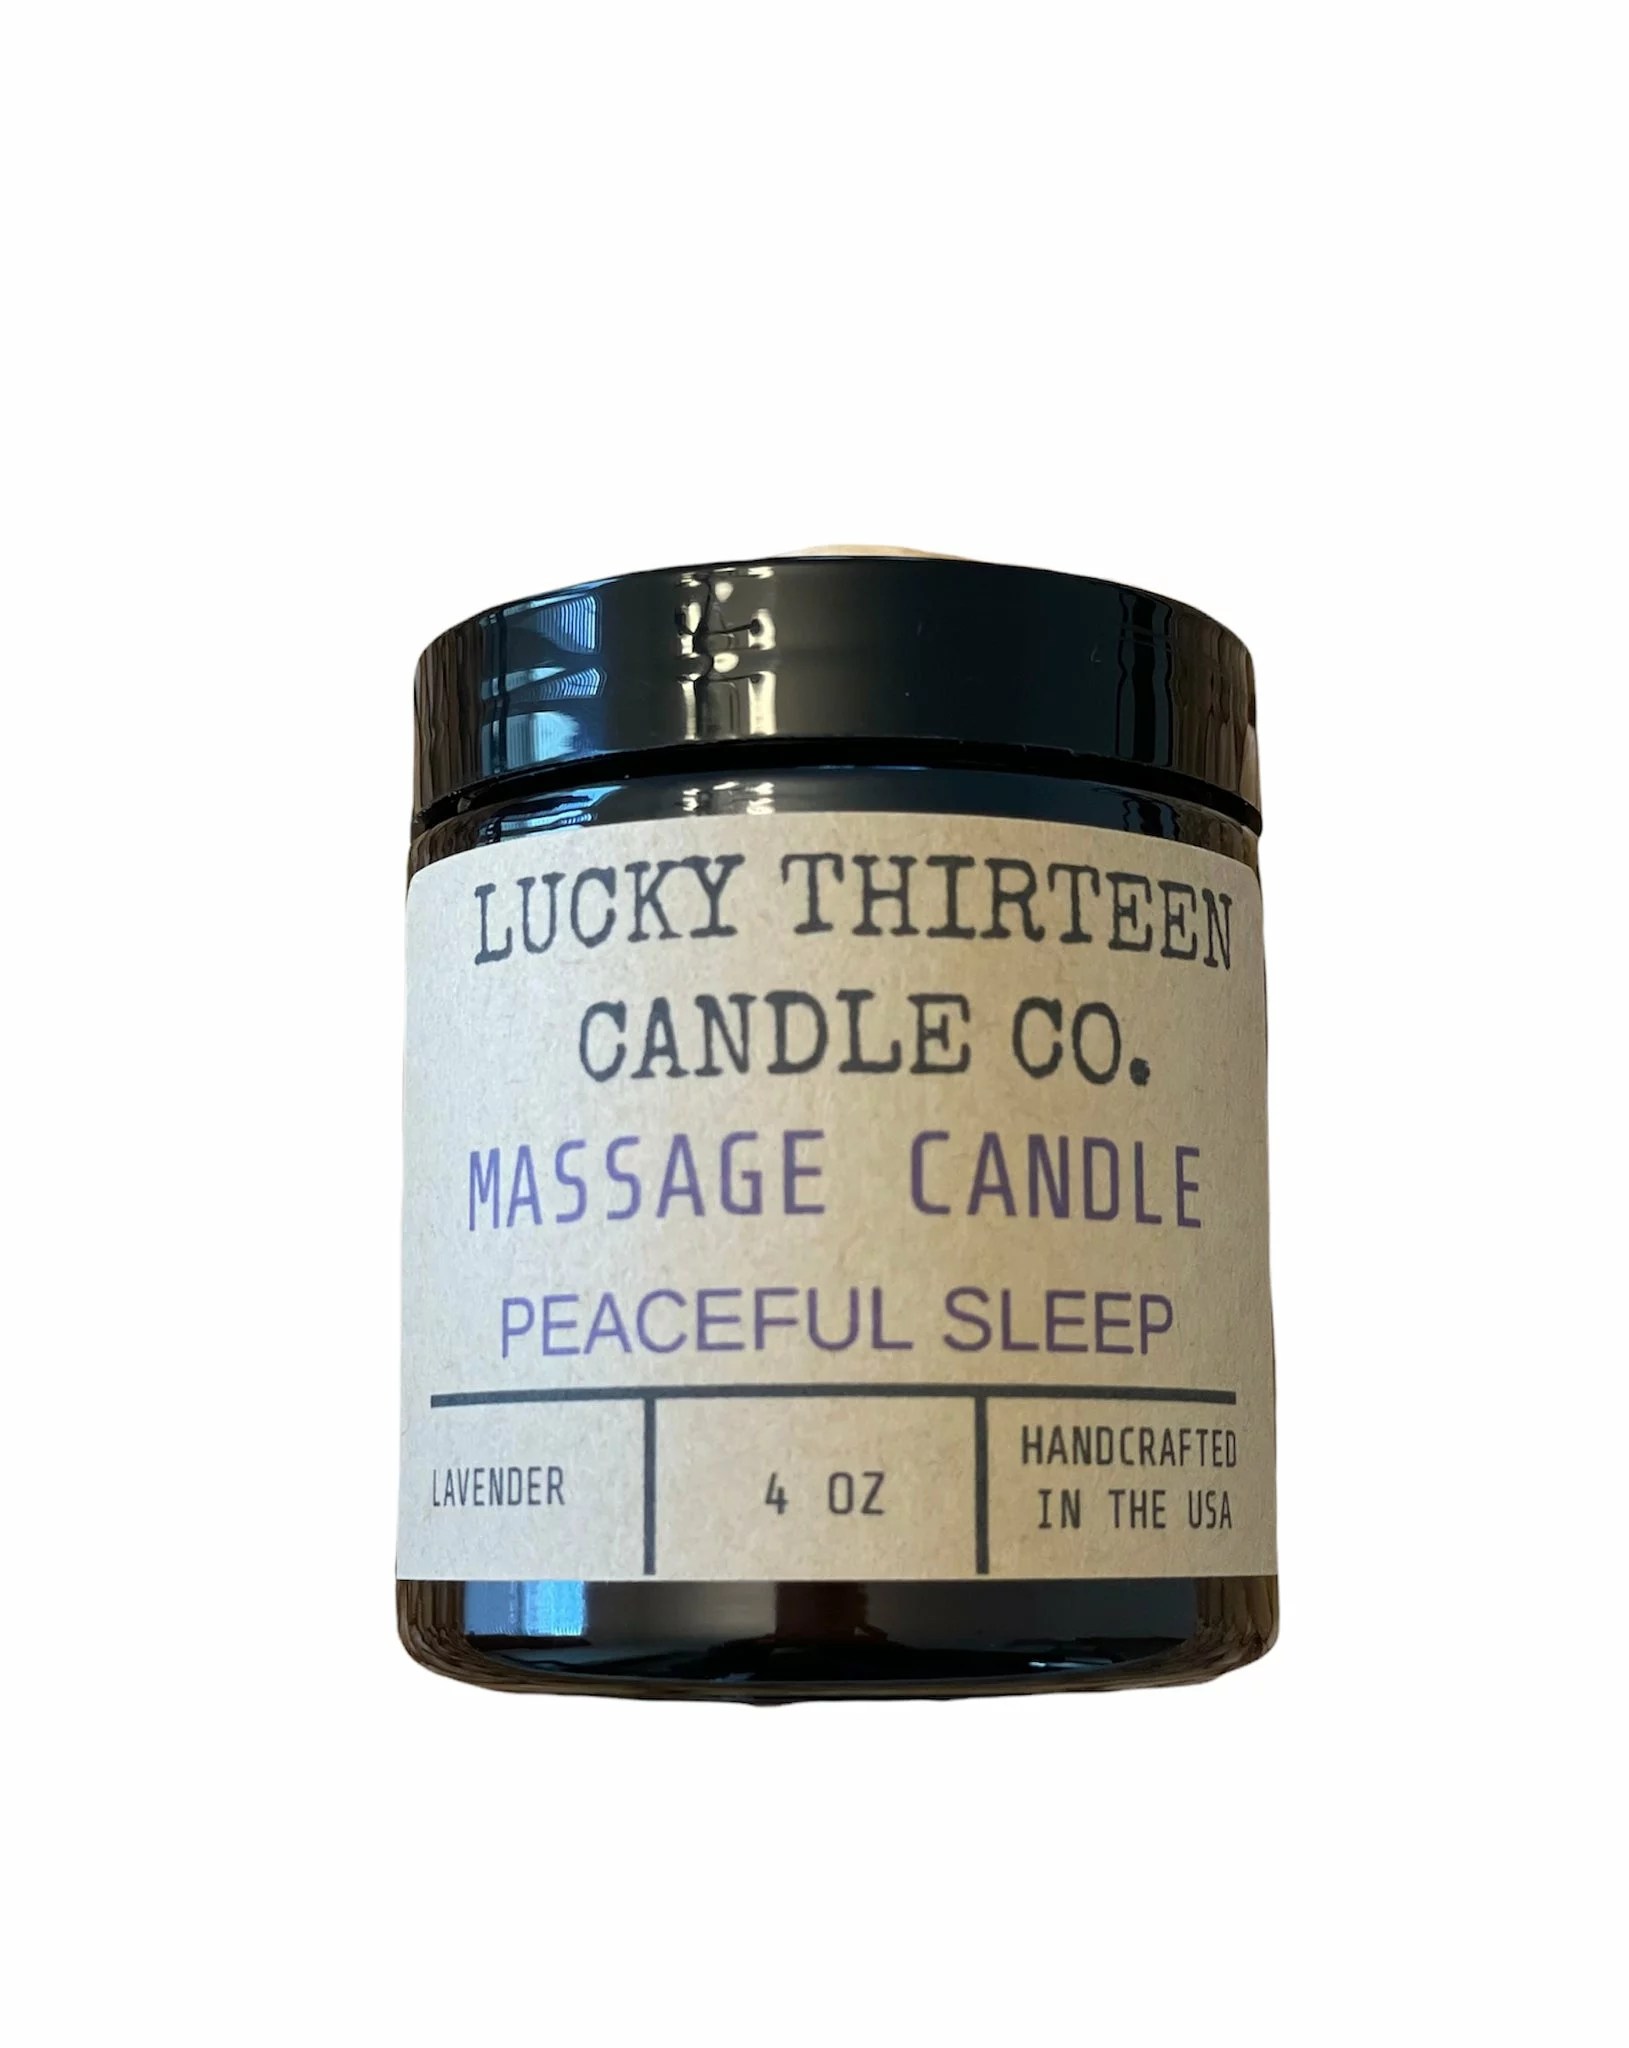 Lucky Thirteen Candle Co. Peaceful Sleep Massage Oil Candle